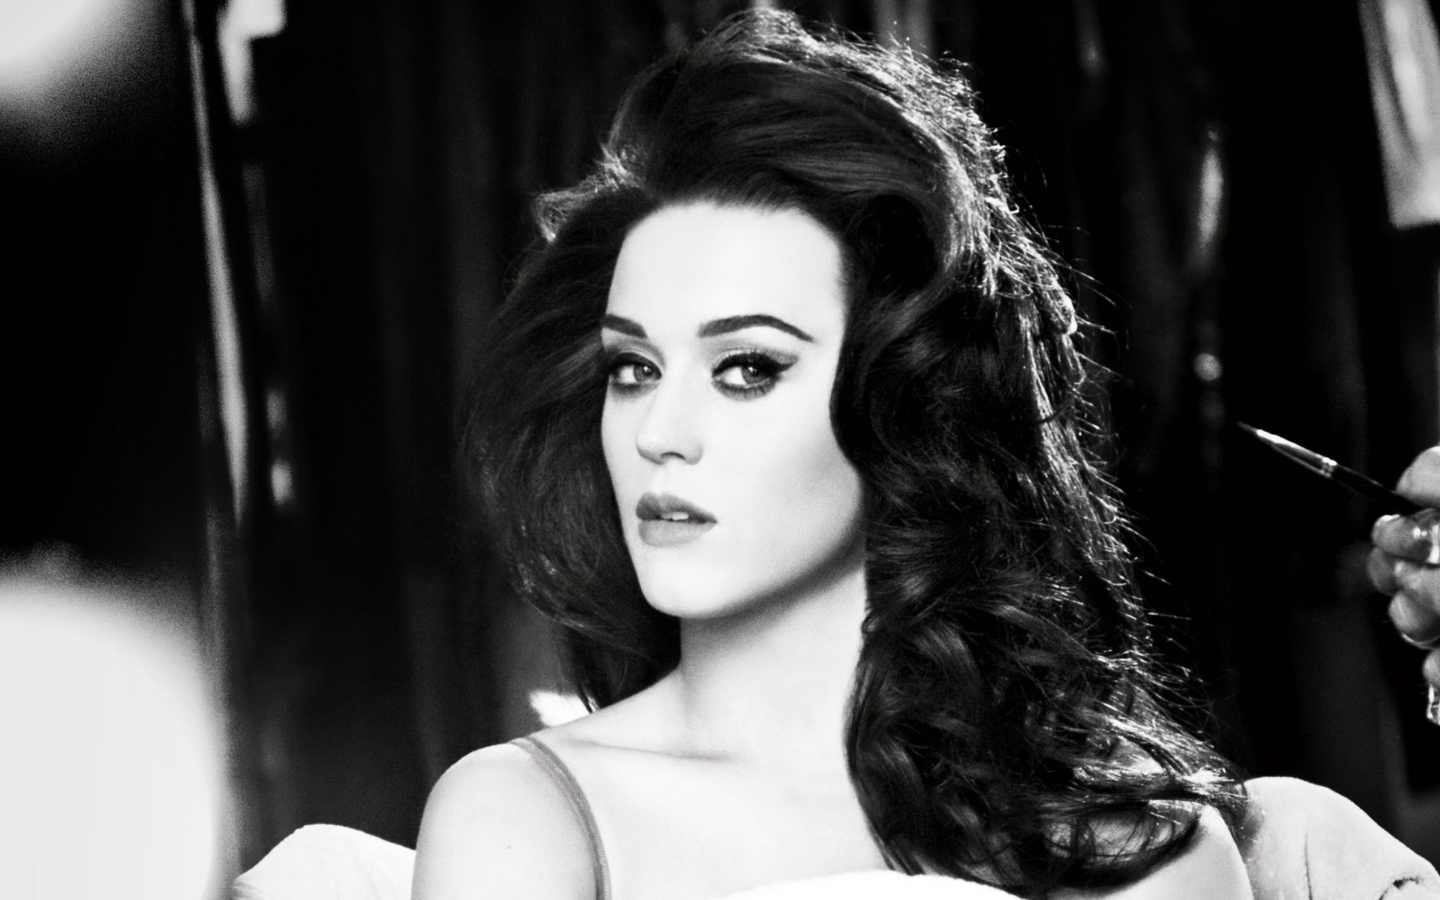 Katy Perry Black And White wallpaper 1440x900